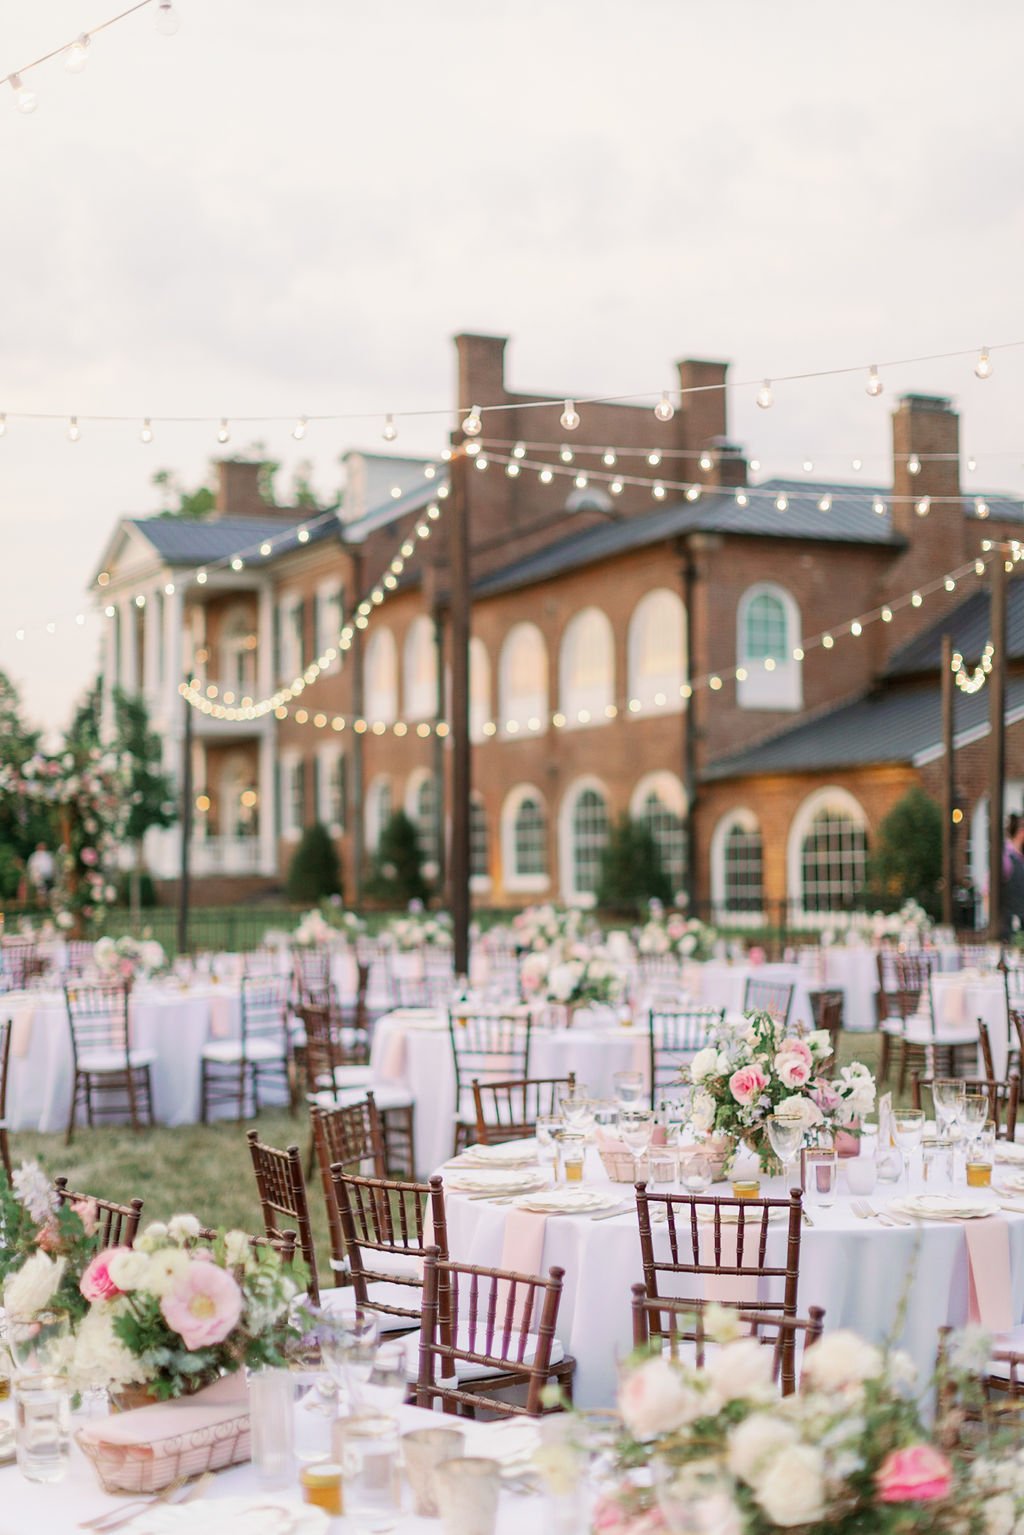 This garden-inspired reception features floral hues of blush, ivory, cream, pink, and hints of French blue along with centerpieces of pink roses, peonies, garden roses, blue delphinium, ranunculus, spirea and hydrangea. Designed by Rosemary & Finch i